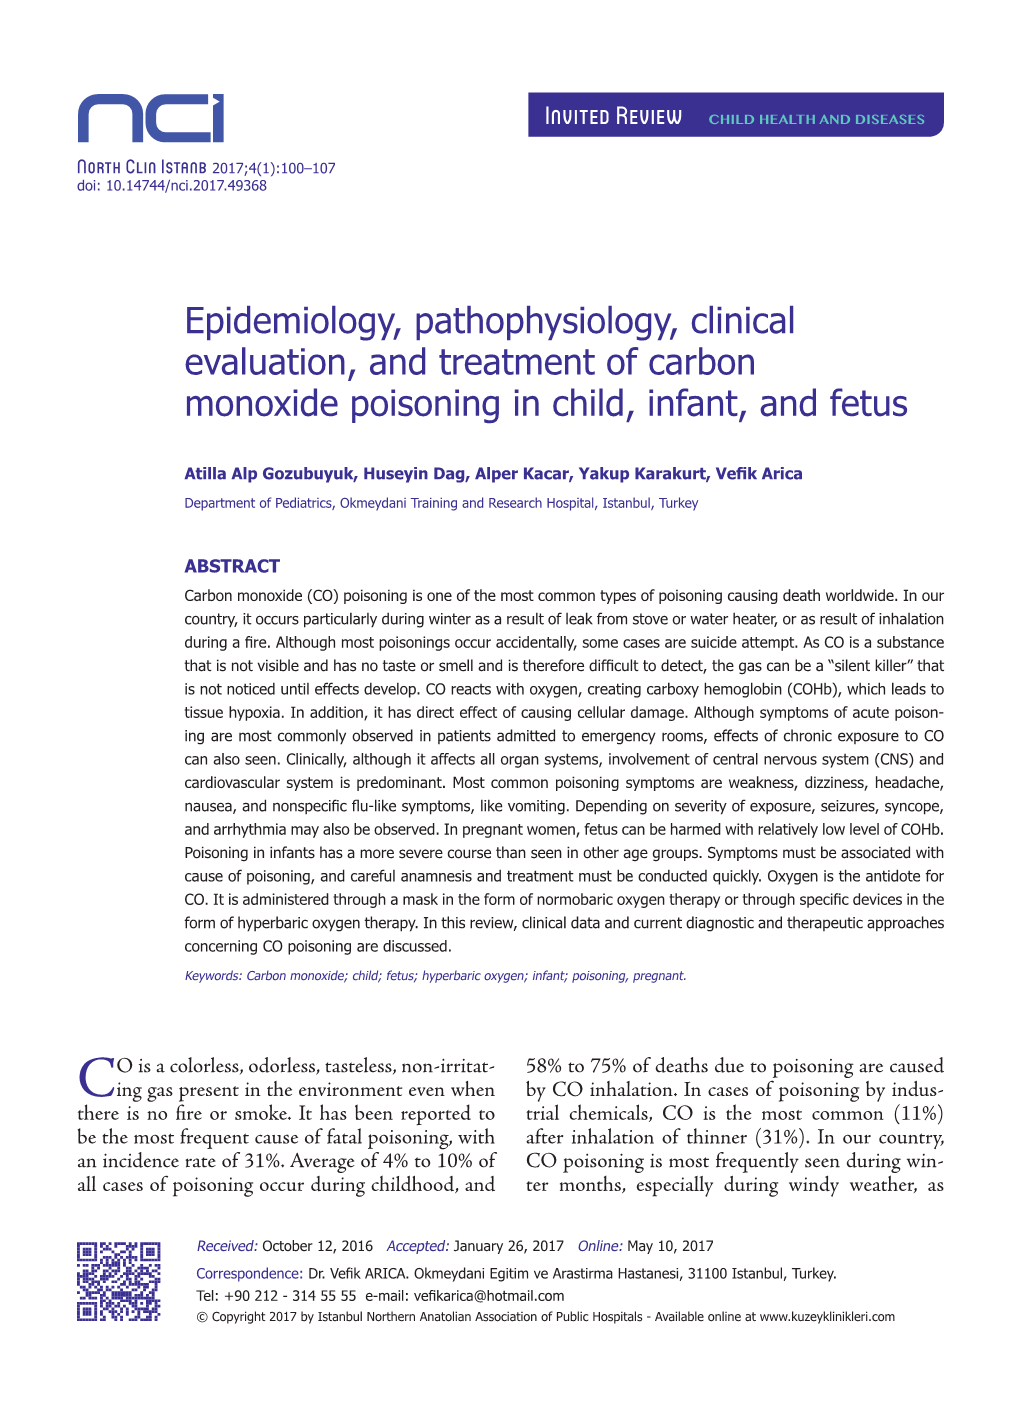 Epidemiology, Pathophysiology, Clinical Evaluation, and Treatment of Carbon Monoxide Poisoning in Child, Infant, and Fetus